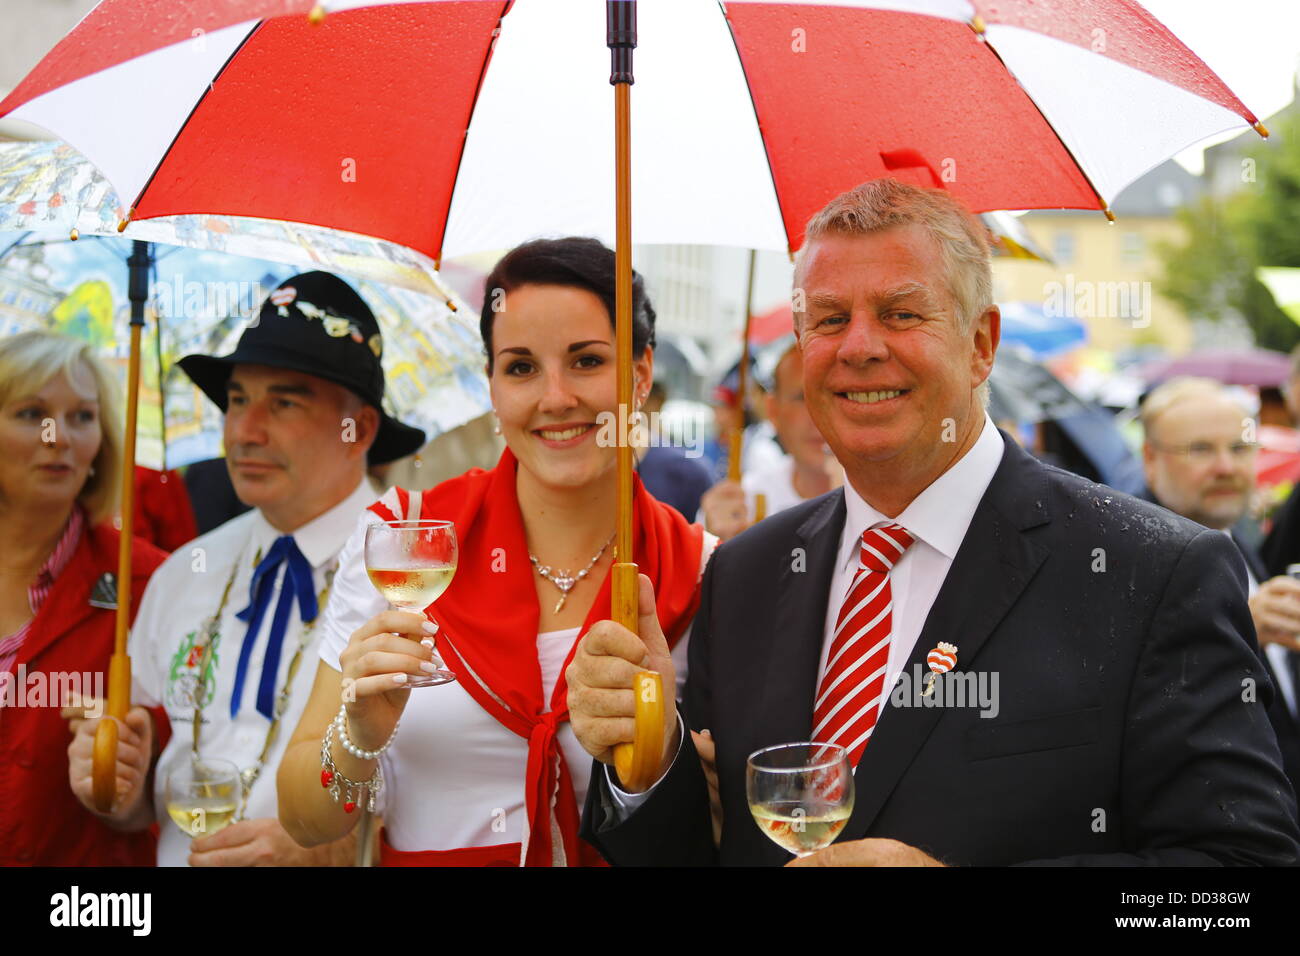 Worms, Germany. 25th August 2013. The Lord Mayor of Worms, Michael Kissel (R) and the Backfischbraut (bride of the mayor of the fishermenÕs lea), Jana Berger (L), are pictured with a glass of wine in their hands. The largest wine fair along the Rhine, the Backfischfest, started its 80th anniversary in  Worms with the traditional handing over of power from the Lord Mayor to the mayor of the fishermenÕs lea. The ceremony included dances and music. Credit:  Michael Debets/Alamy Live News Stock Photo